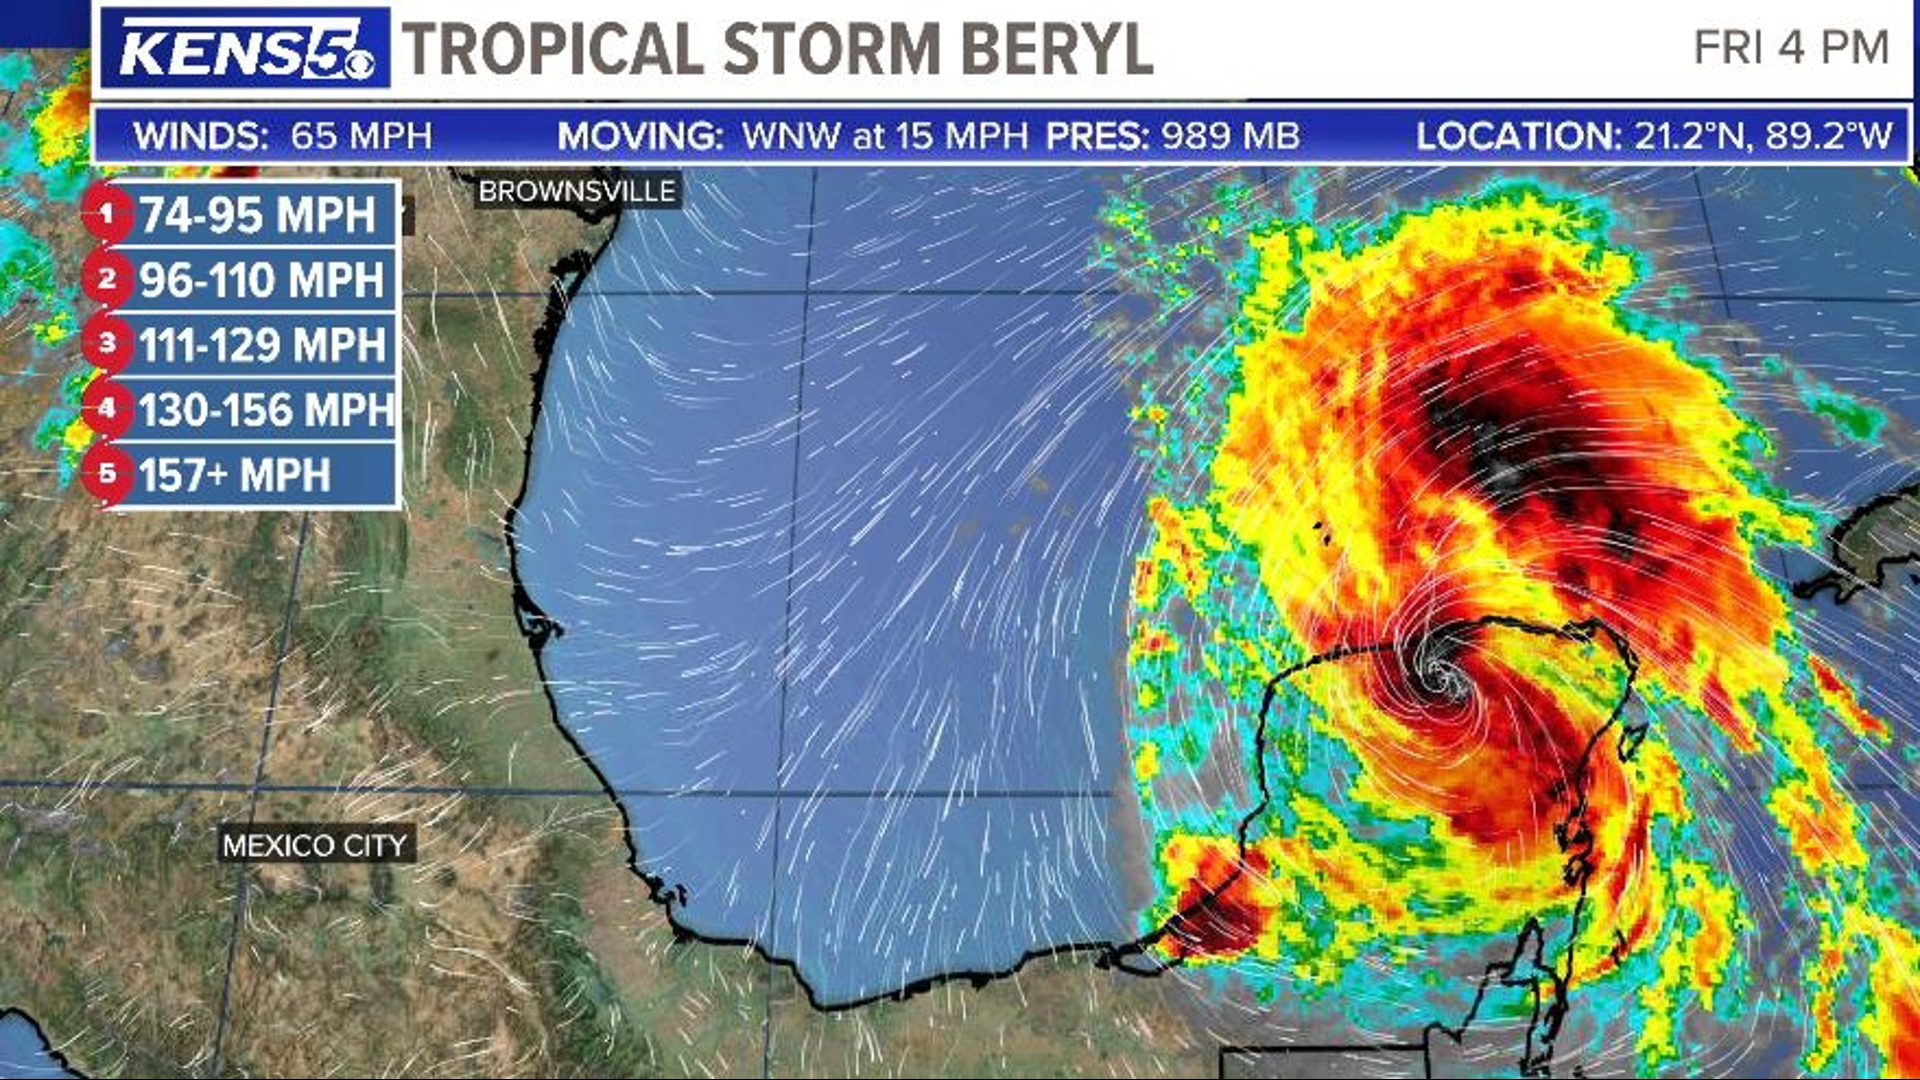 San Antonio is projected to get a few inches of rain early next week, but the exact forecast depends on Beryl’s arrival point on the Texas coast.